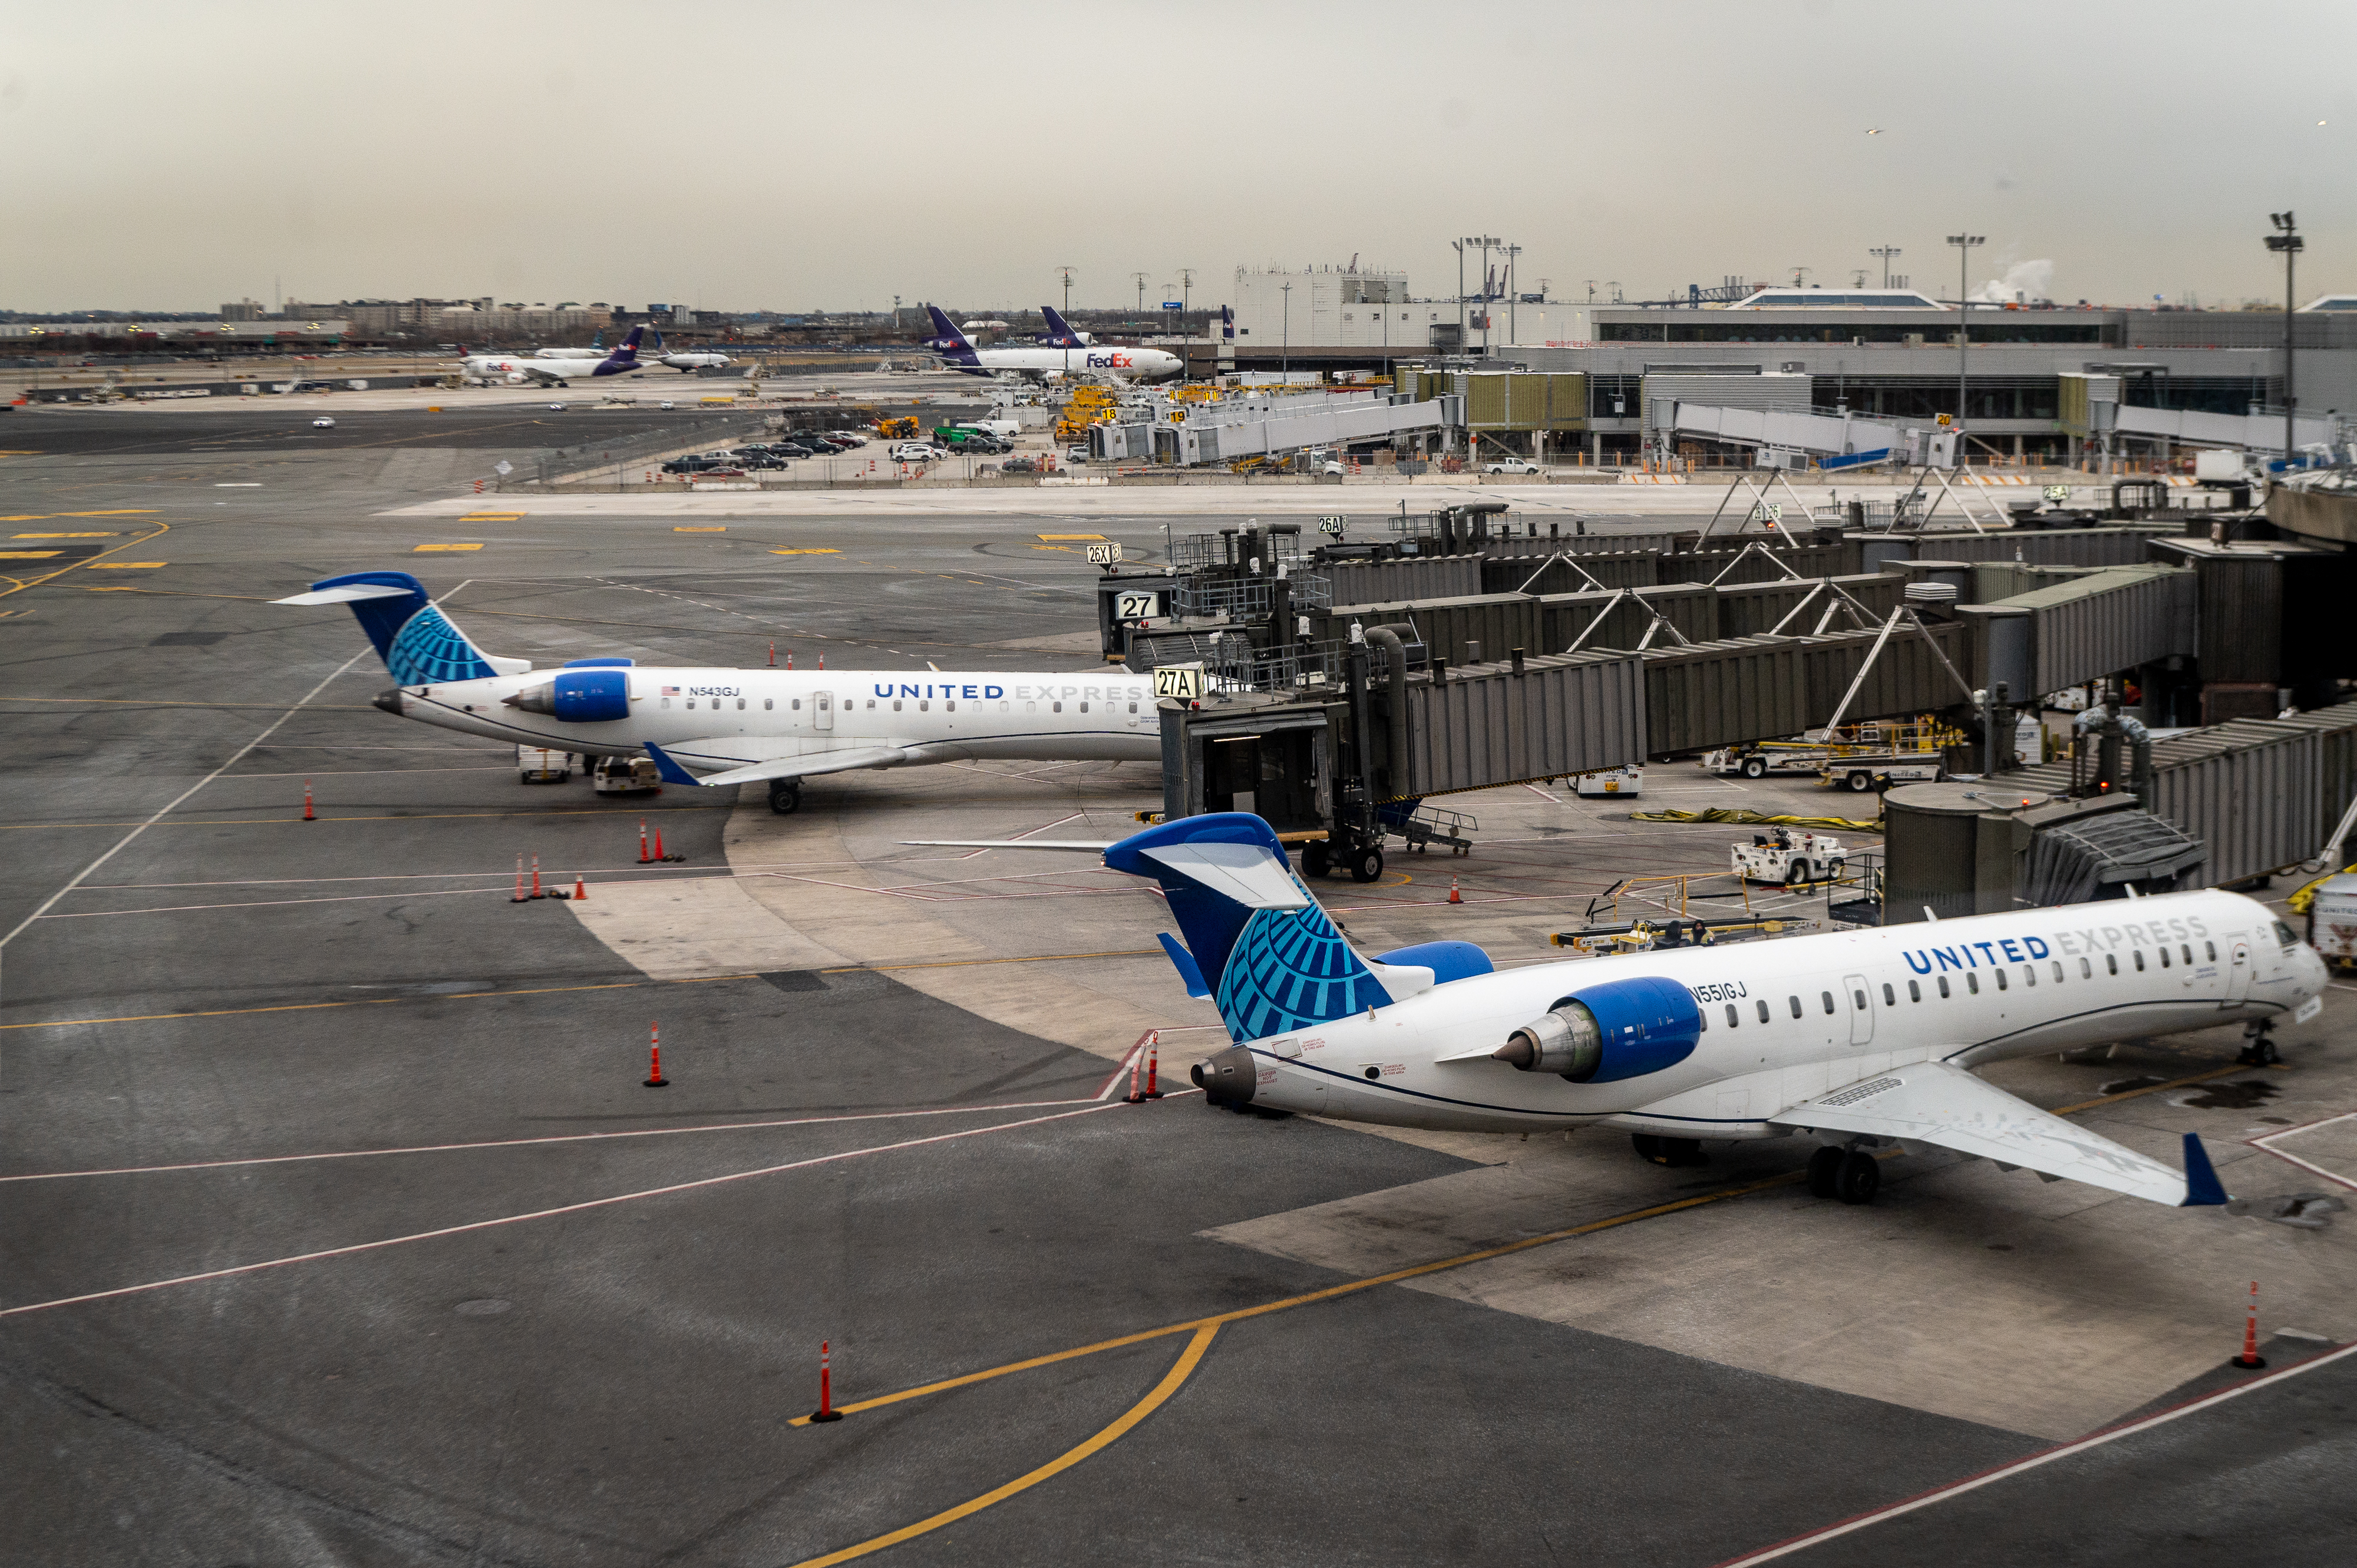 United Airlines airplanes on the tarmac at Newark Liberty International Airport (EWR) in Newark, New Jersey, U.S., on Monday, January. 3, 2022. 